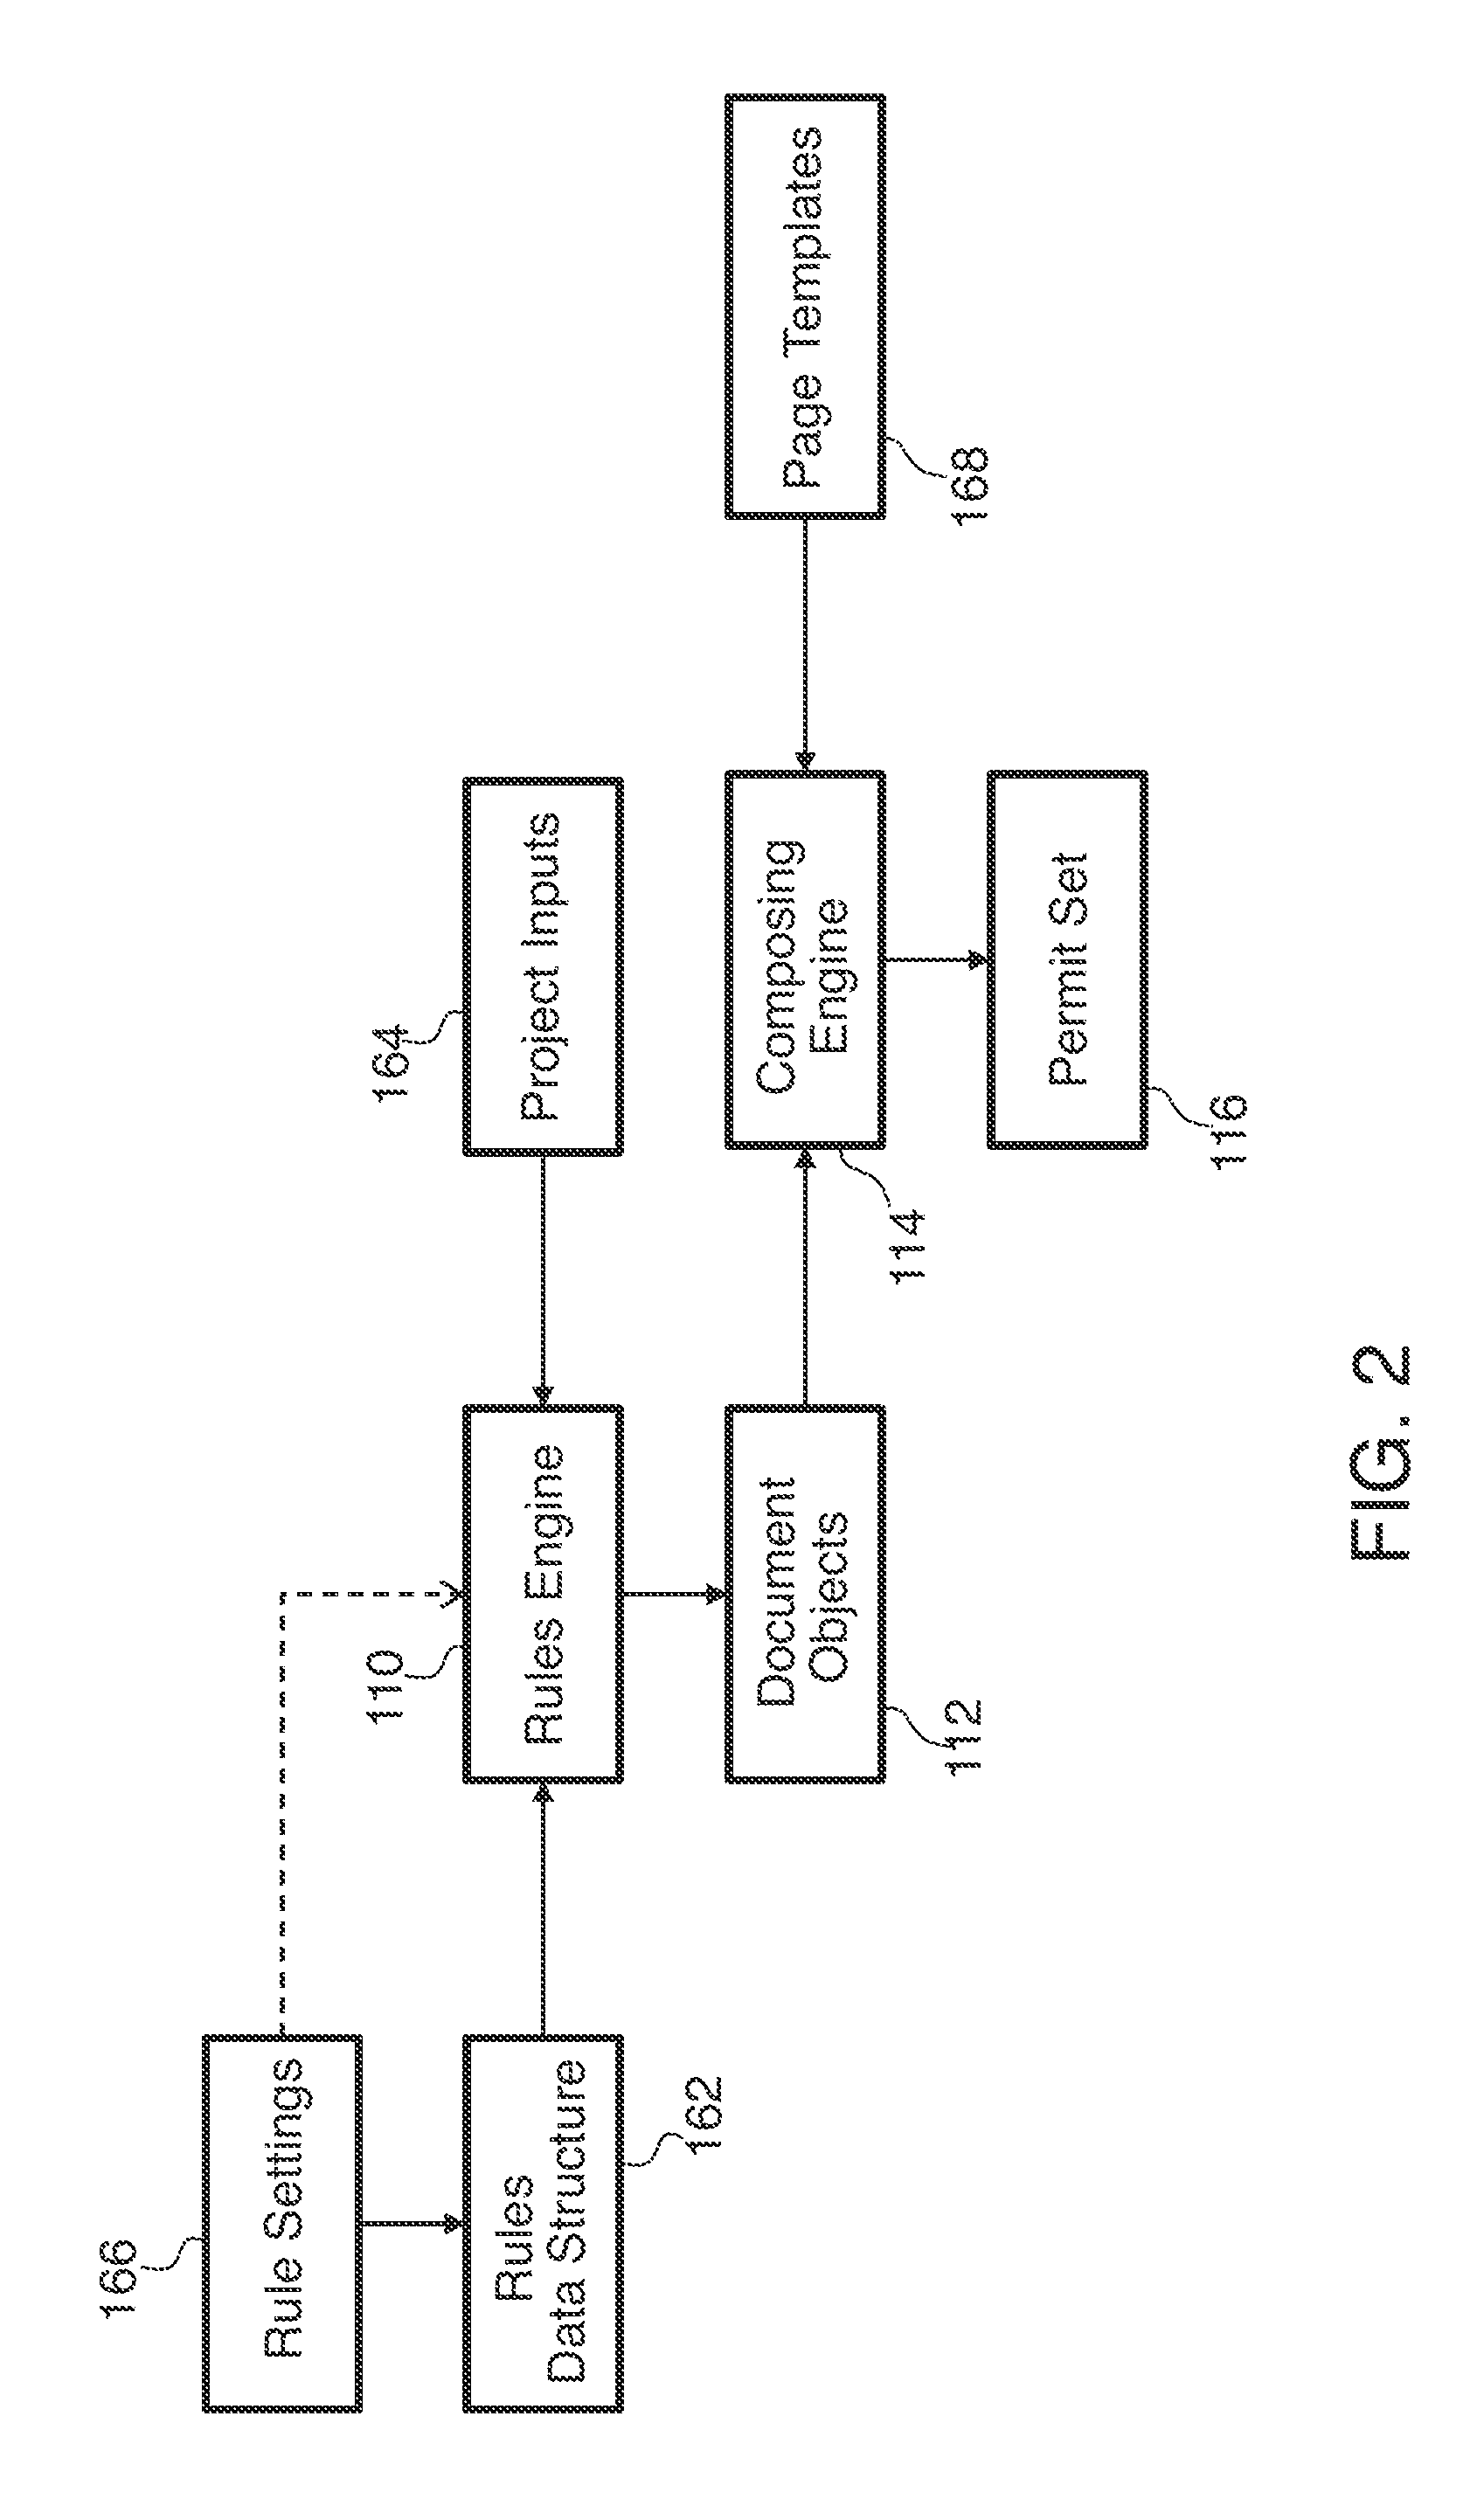 Systems and Methods for Generating Permit Sets